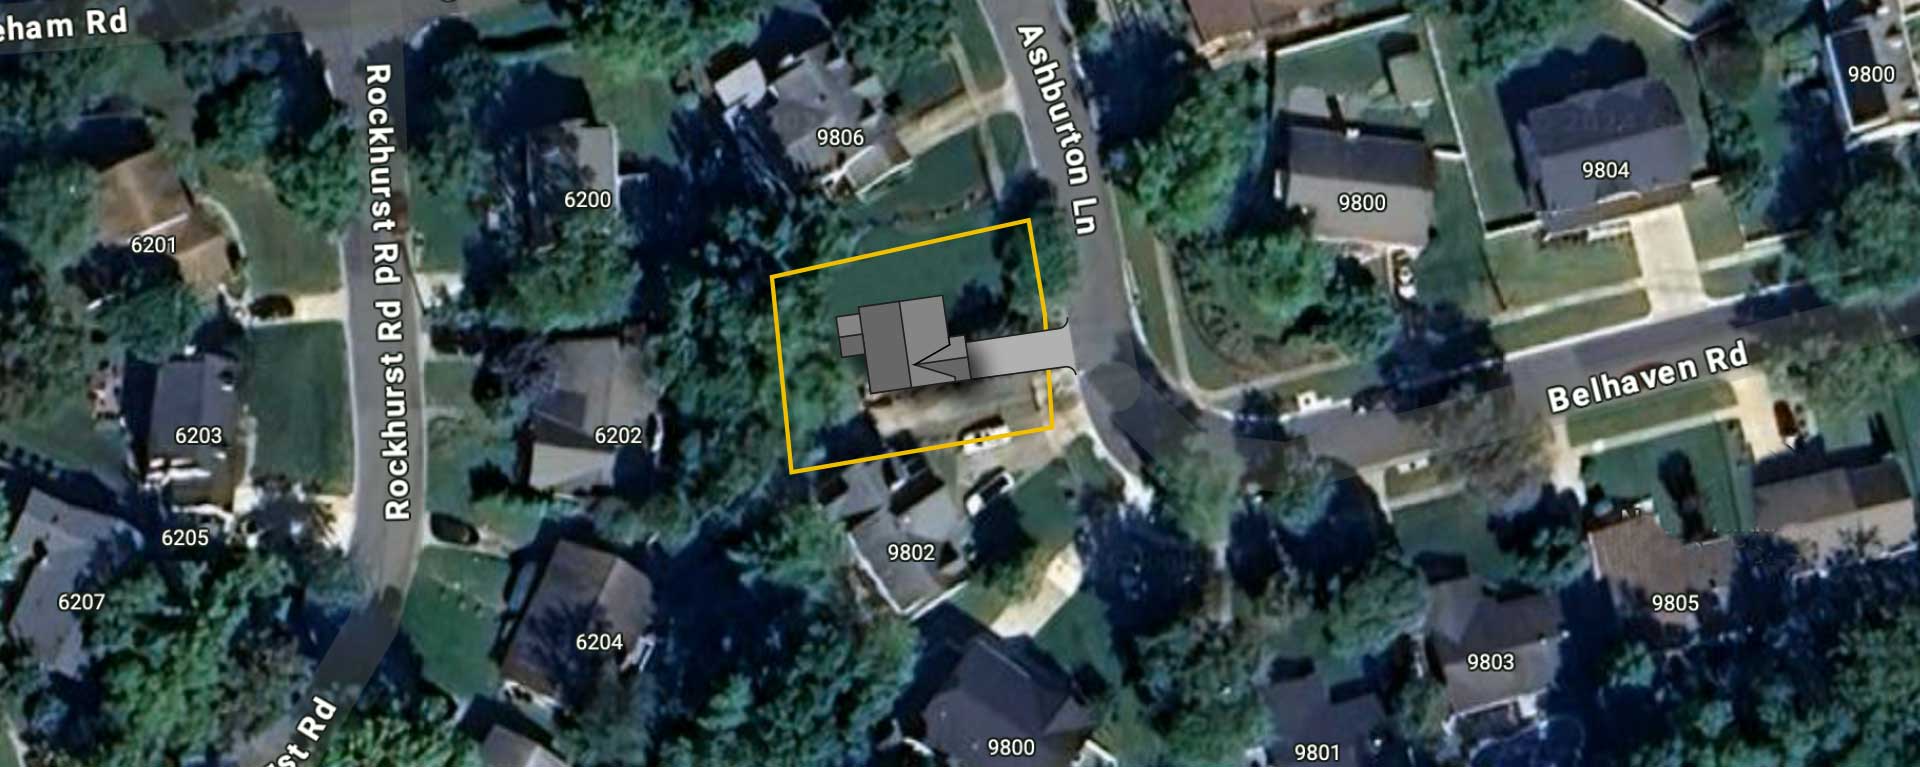 A satellite image of 9804 Ashburton Ln with site outline, house and driveway illustrations superimposed.